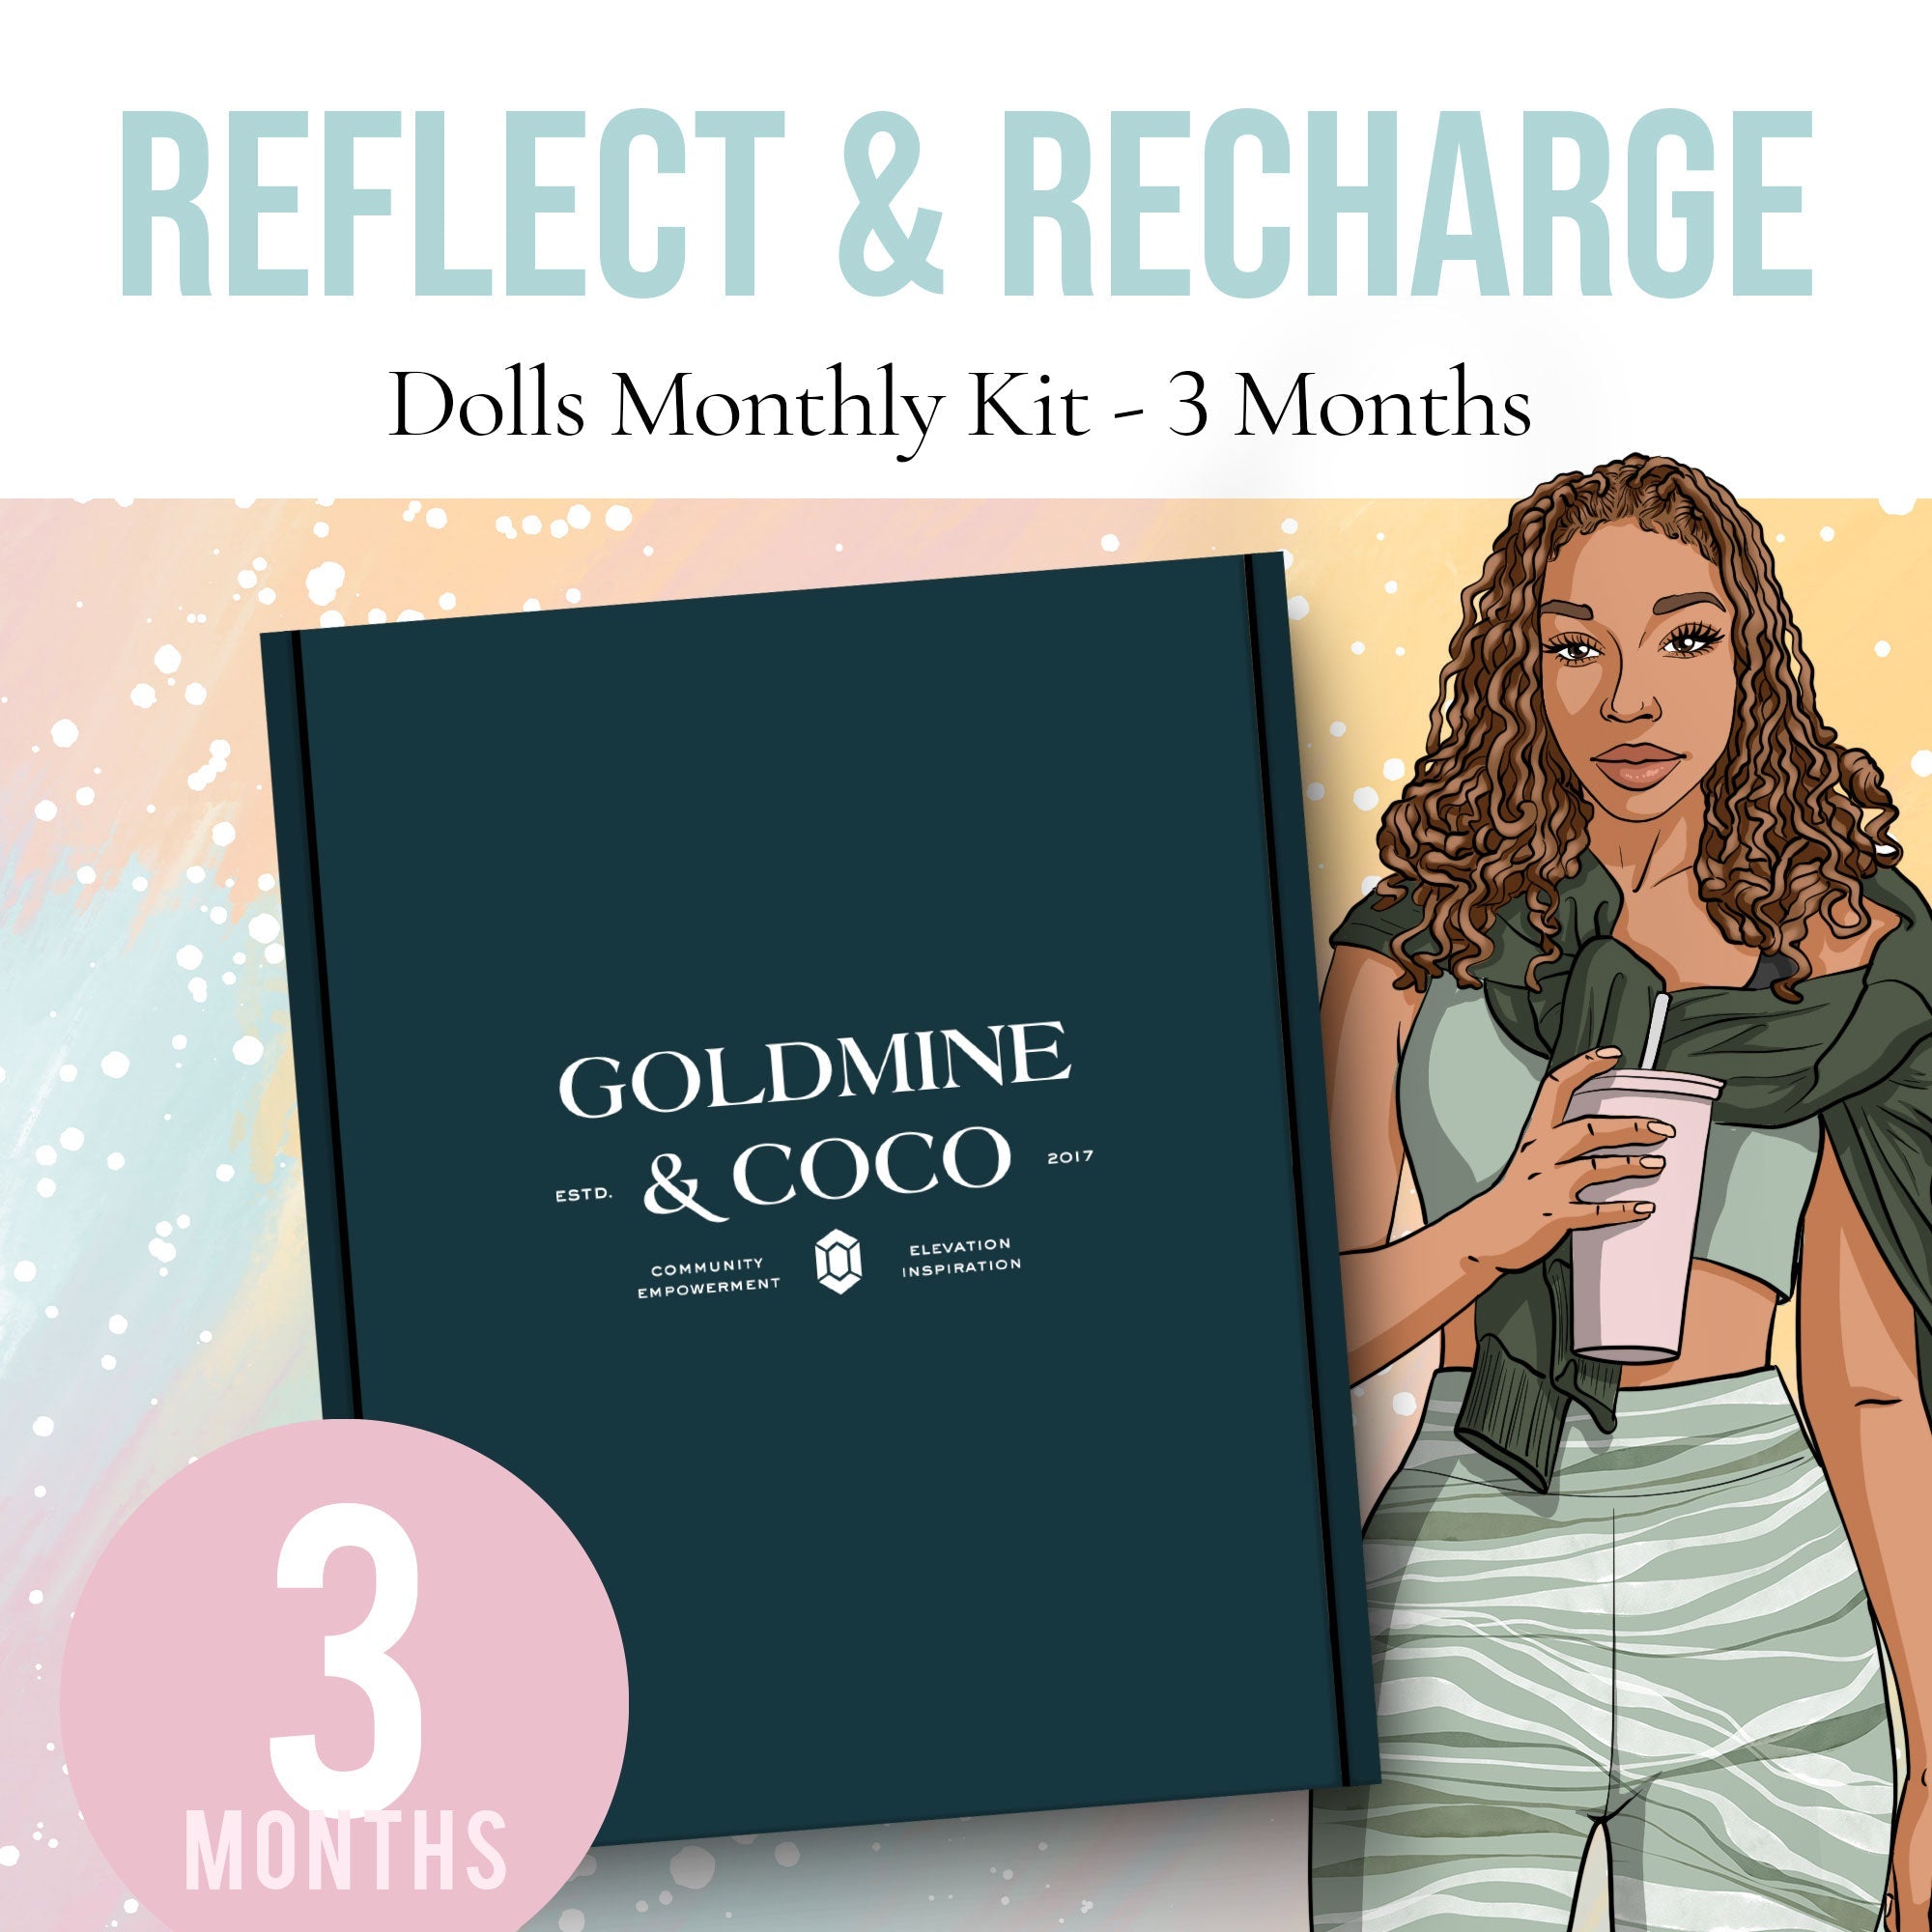 Standard Planning + Journaling: Monthly Subscription Kit | 3 Months - Goldmine & Coco - 